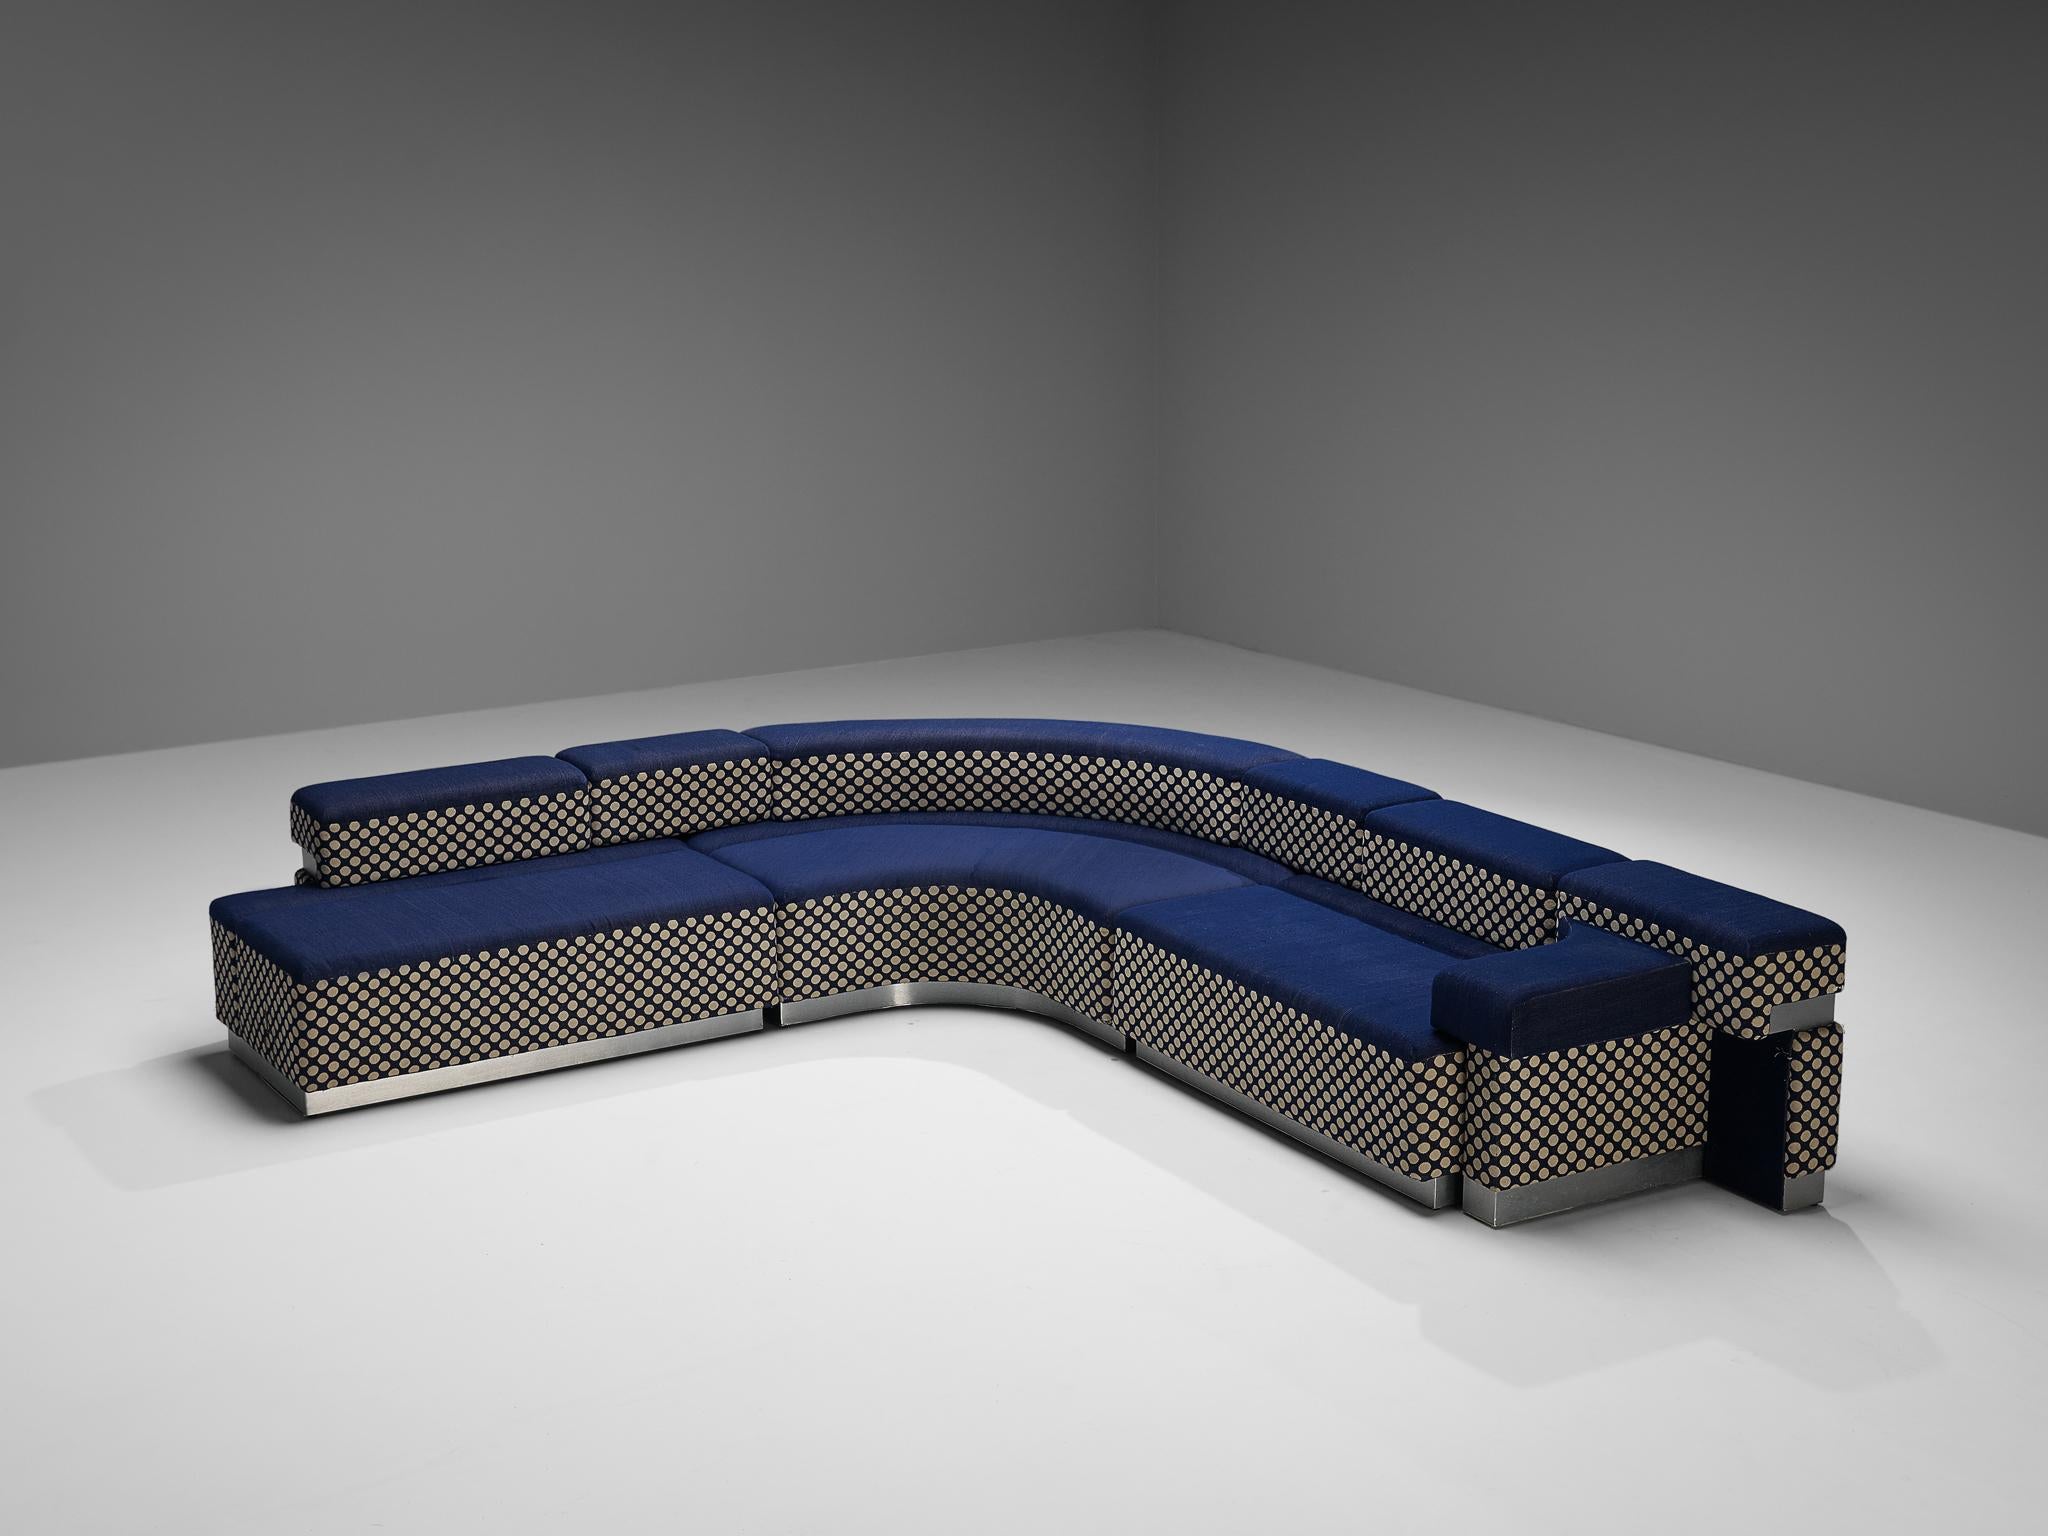 Postmodern Italian Sectional Sofa in Blue and Off-White Dots Upholstery